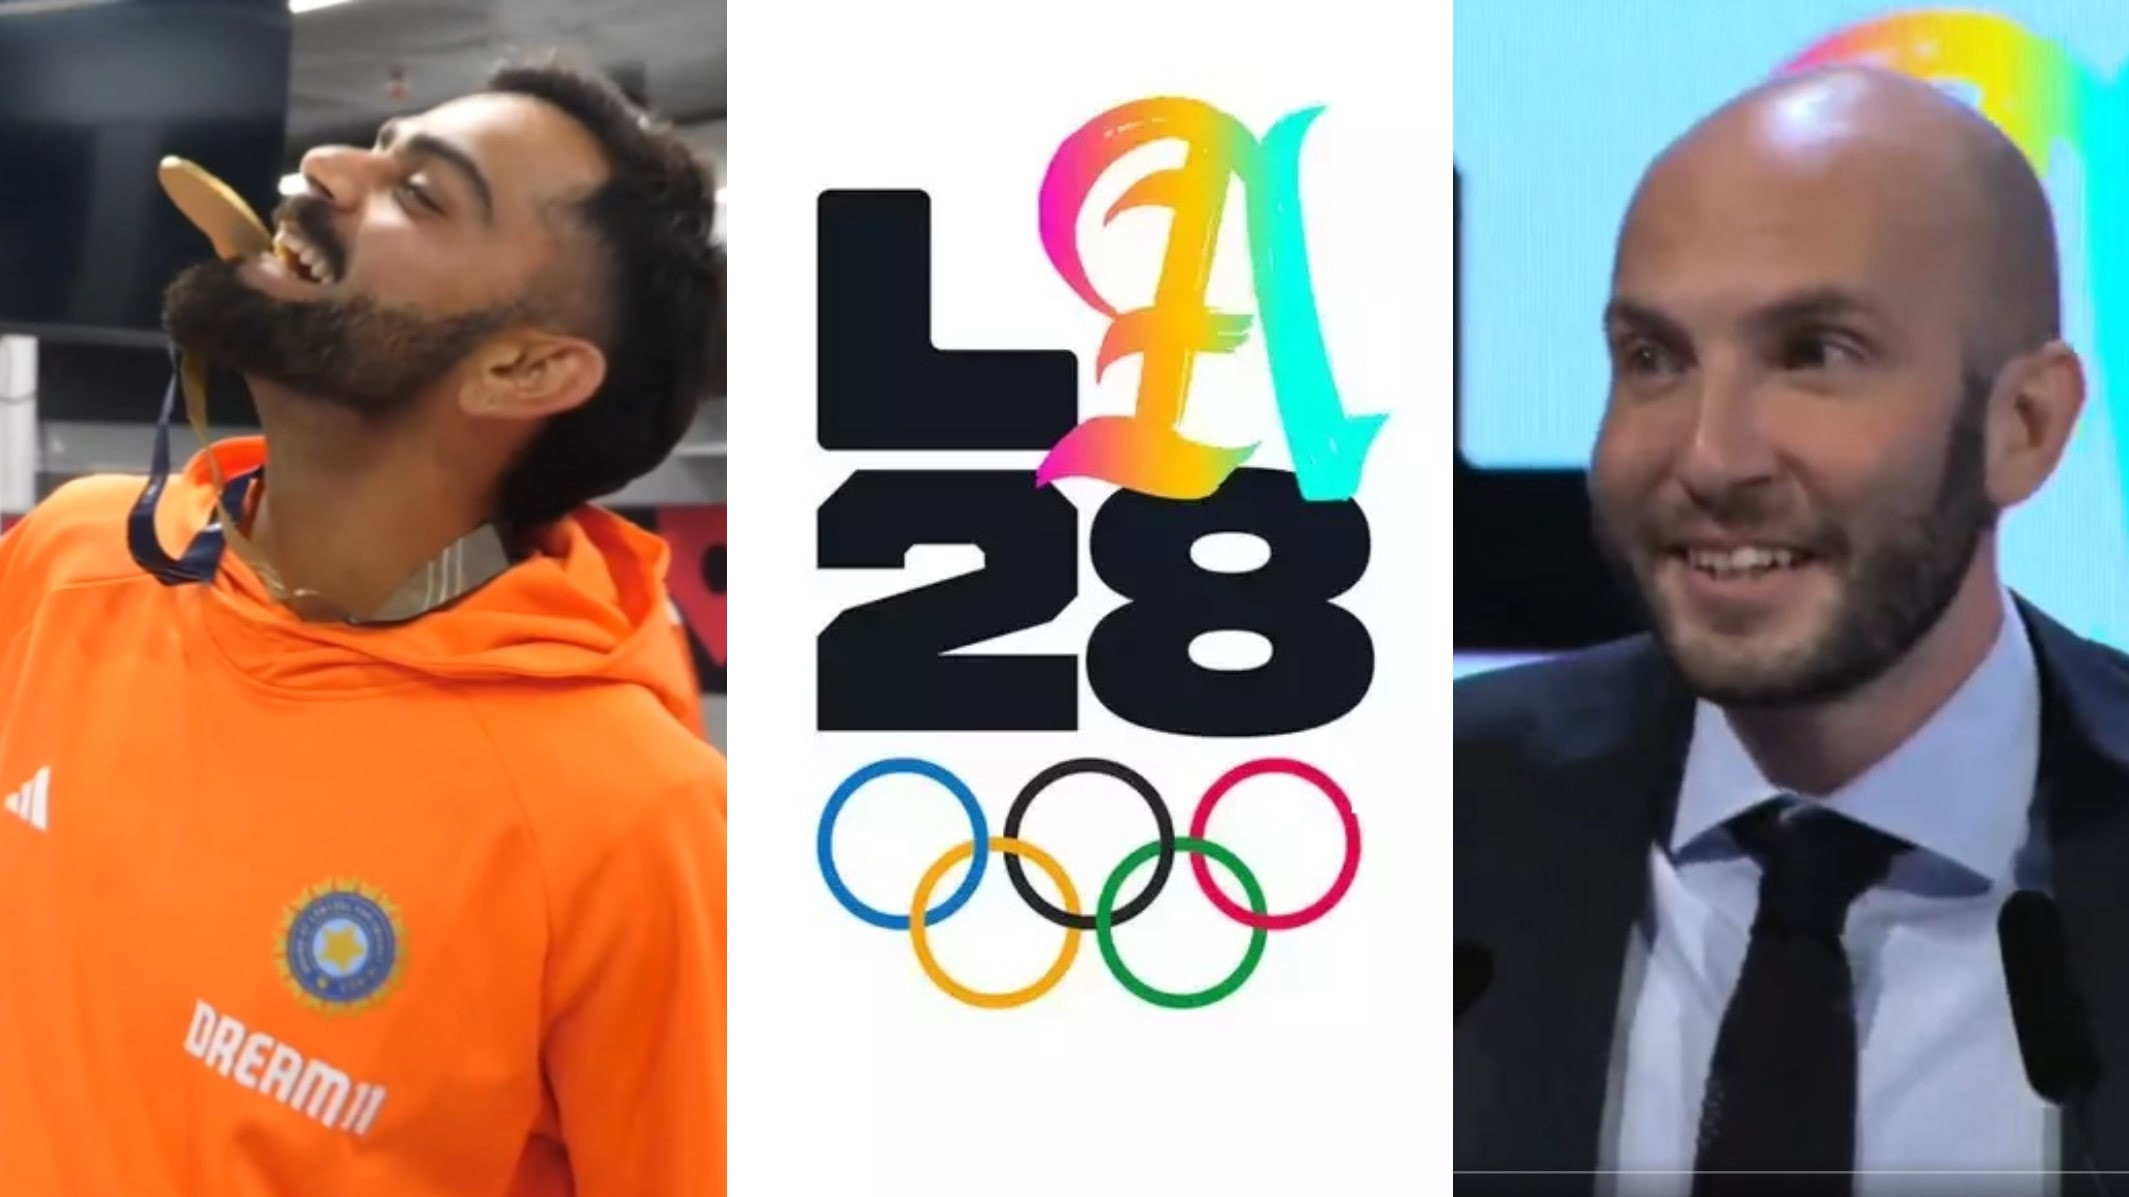 WATCH: Virat Kohli's following cited as a key factor behind cricket's inclusion for the LA 2028 Olympic games